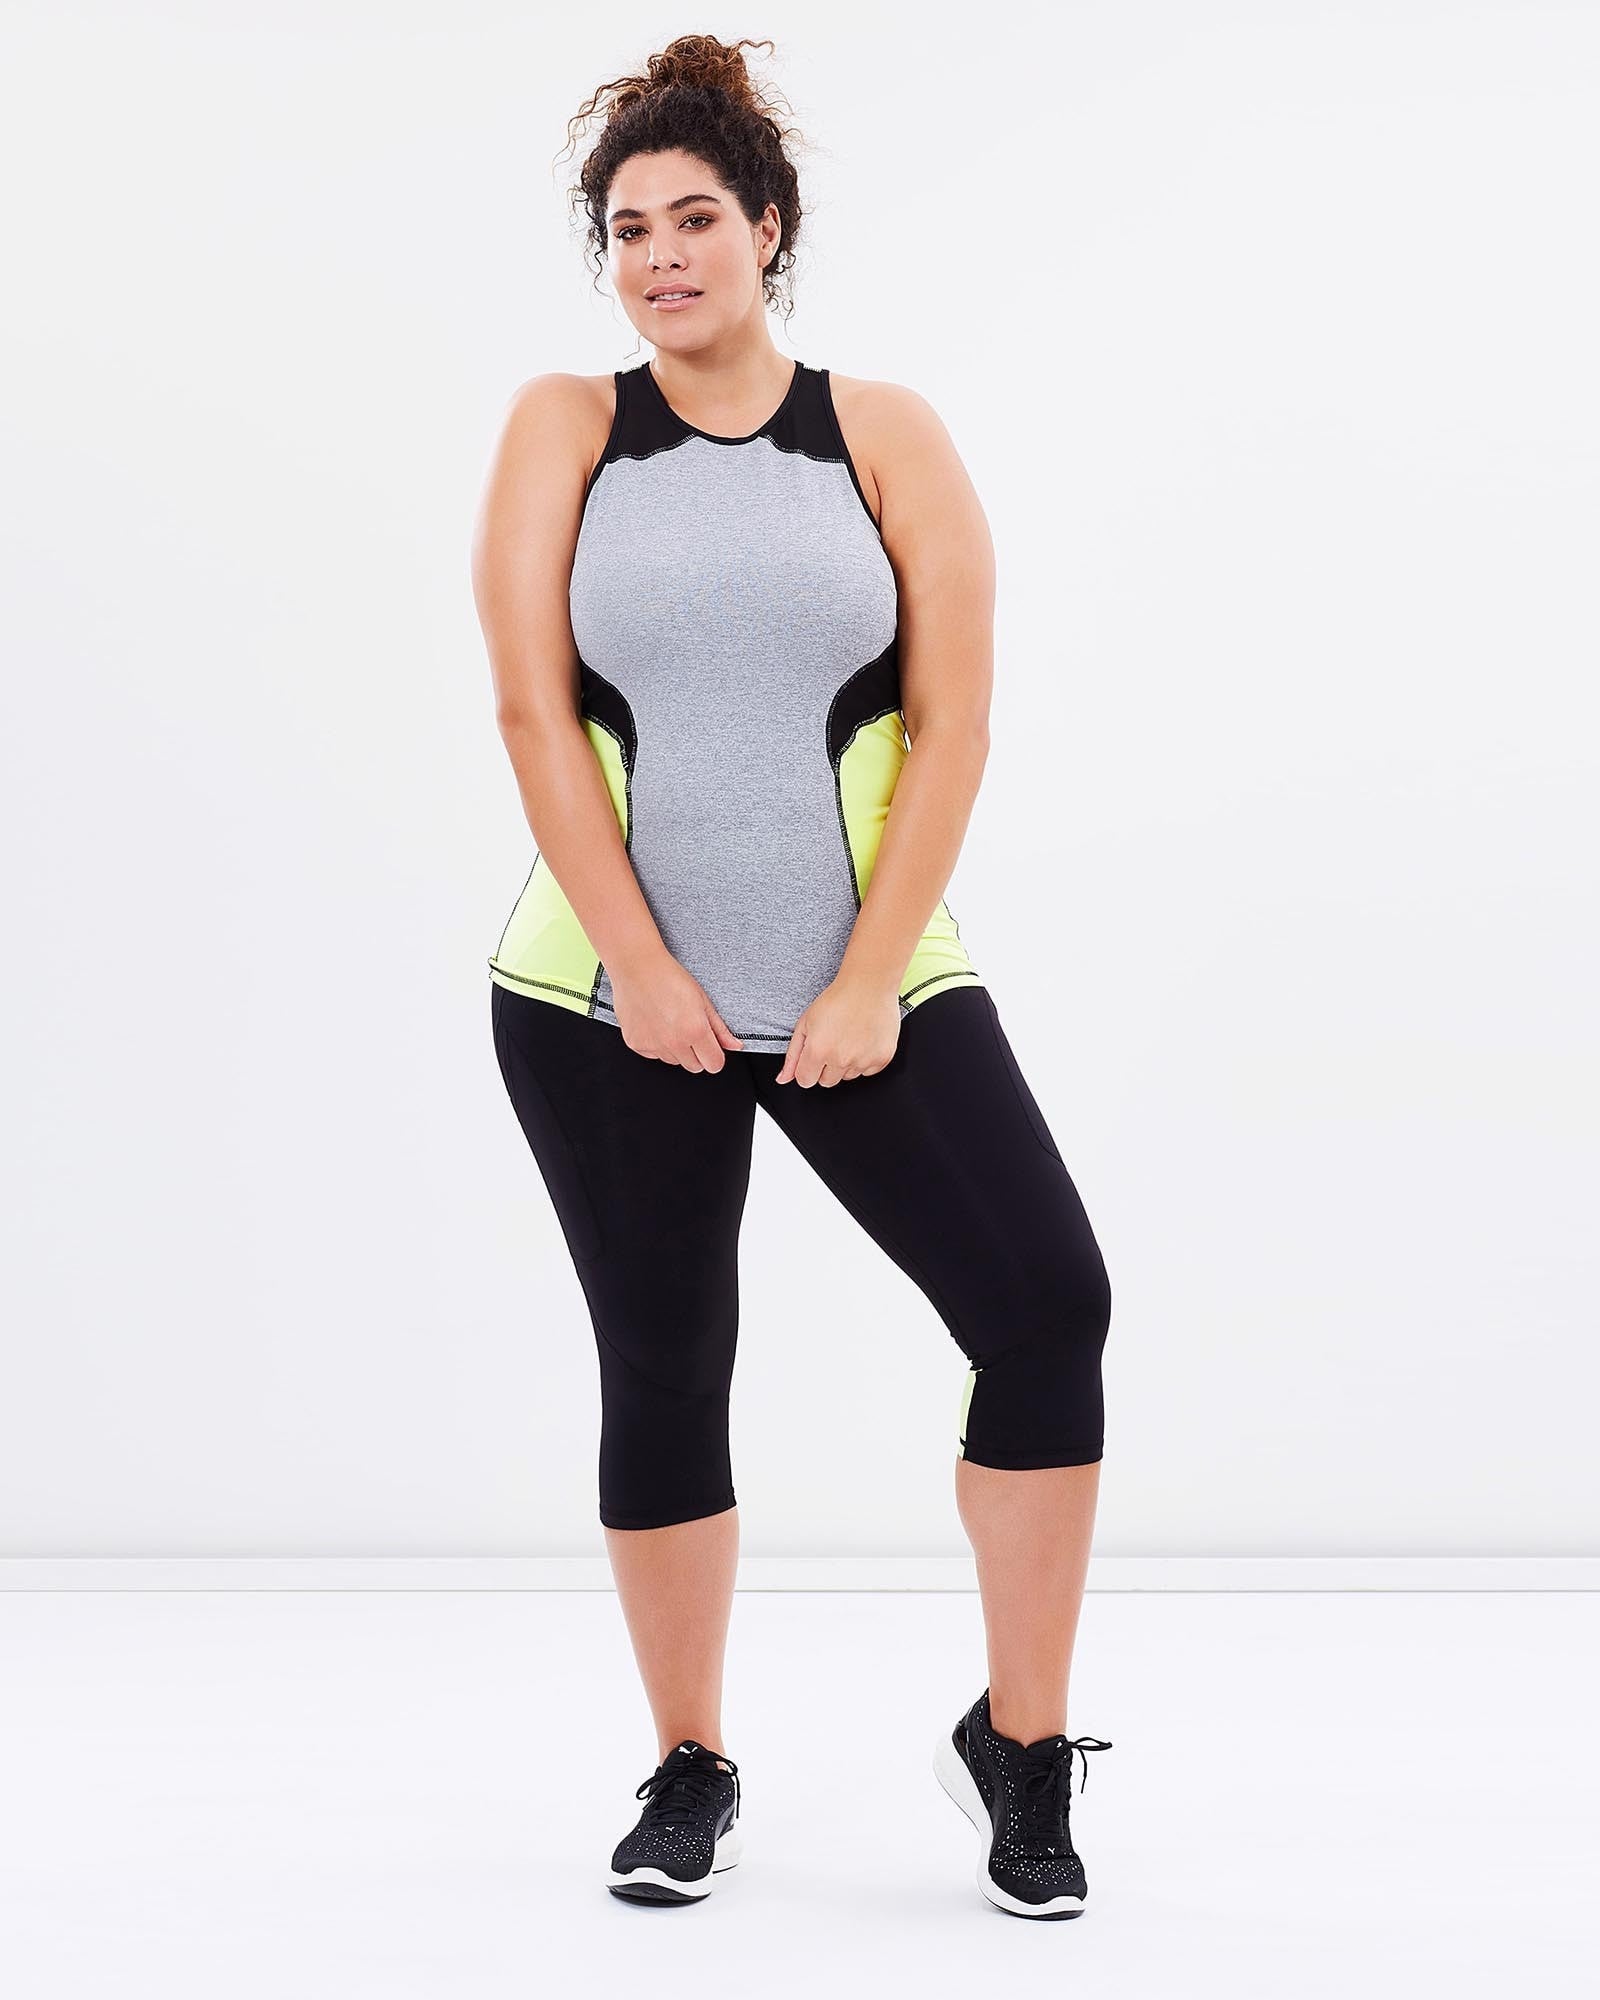 Tempo Tank - Green - Be Activewear